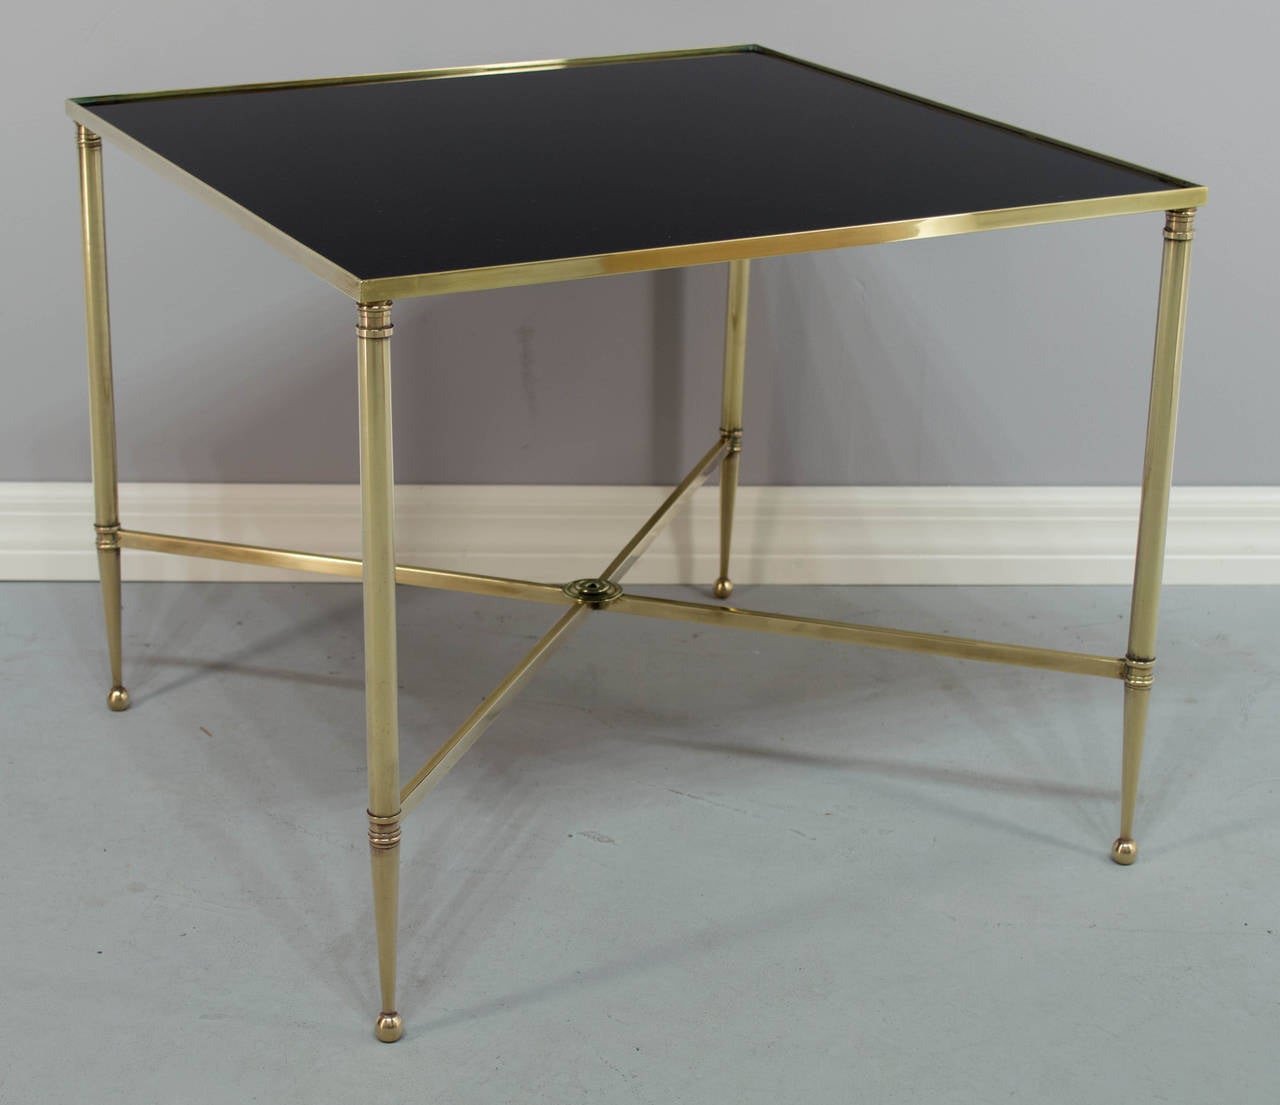 Small French square cocktail or side table made of solid brass with black glass top. Attributed to Maison Jansen. Brass has been polished but not lacquered. More photos available upon request. We have a large selection of French antiques. Please